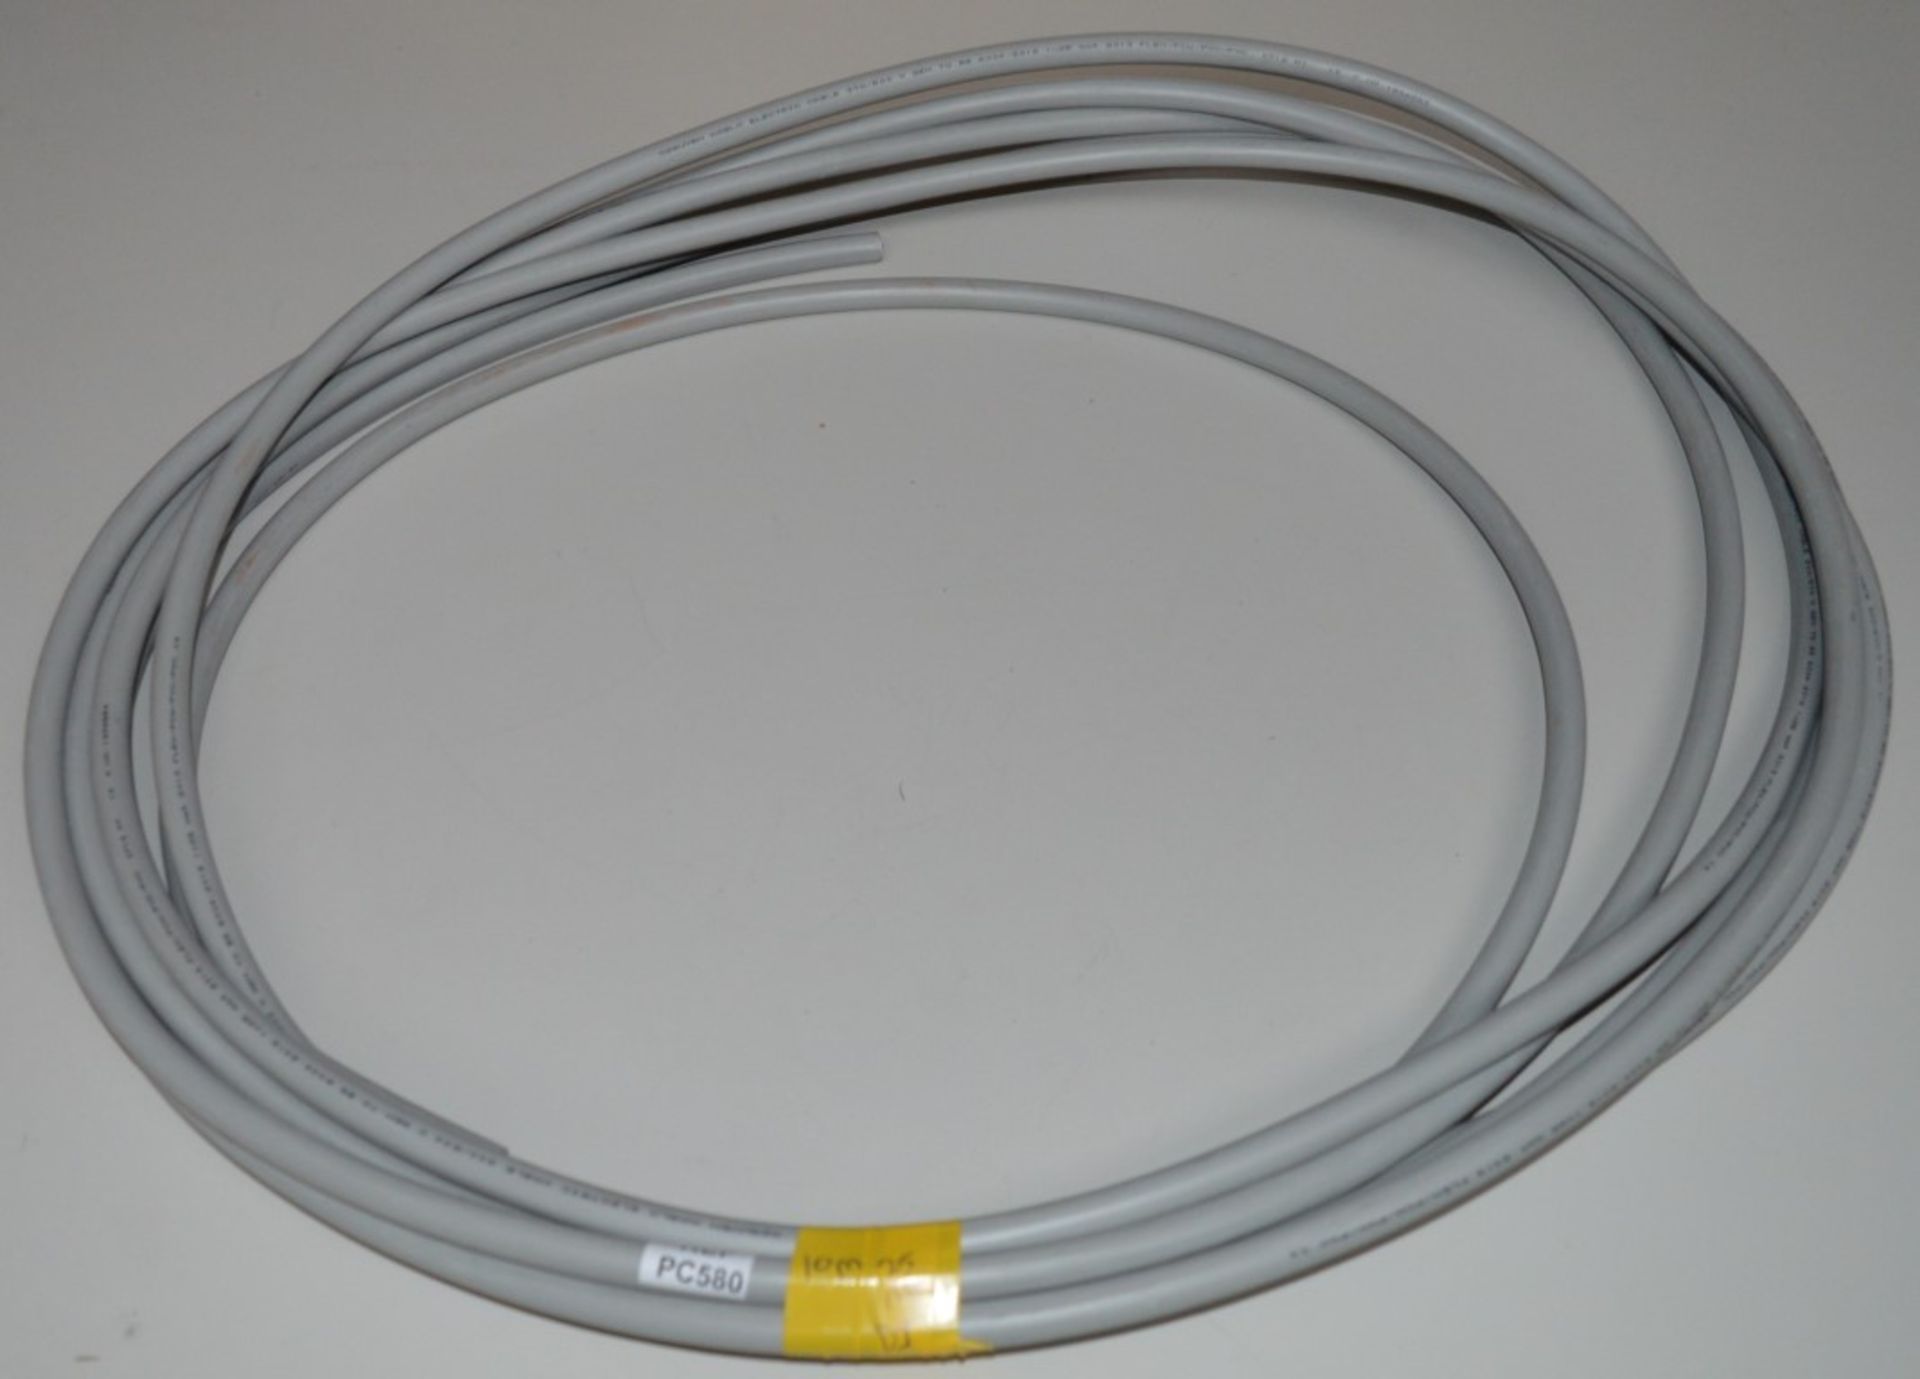 10 x Meters of OZGUVEN Electric Cable 300/500v - Unused - CL300 - Ref PC580 - Location: Altrincham - Image 7 of 10